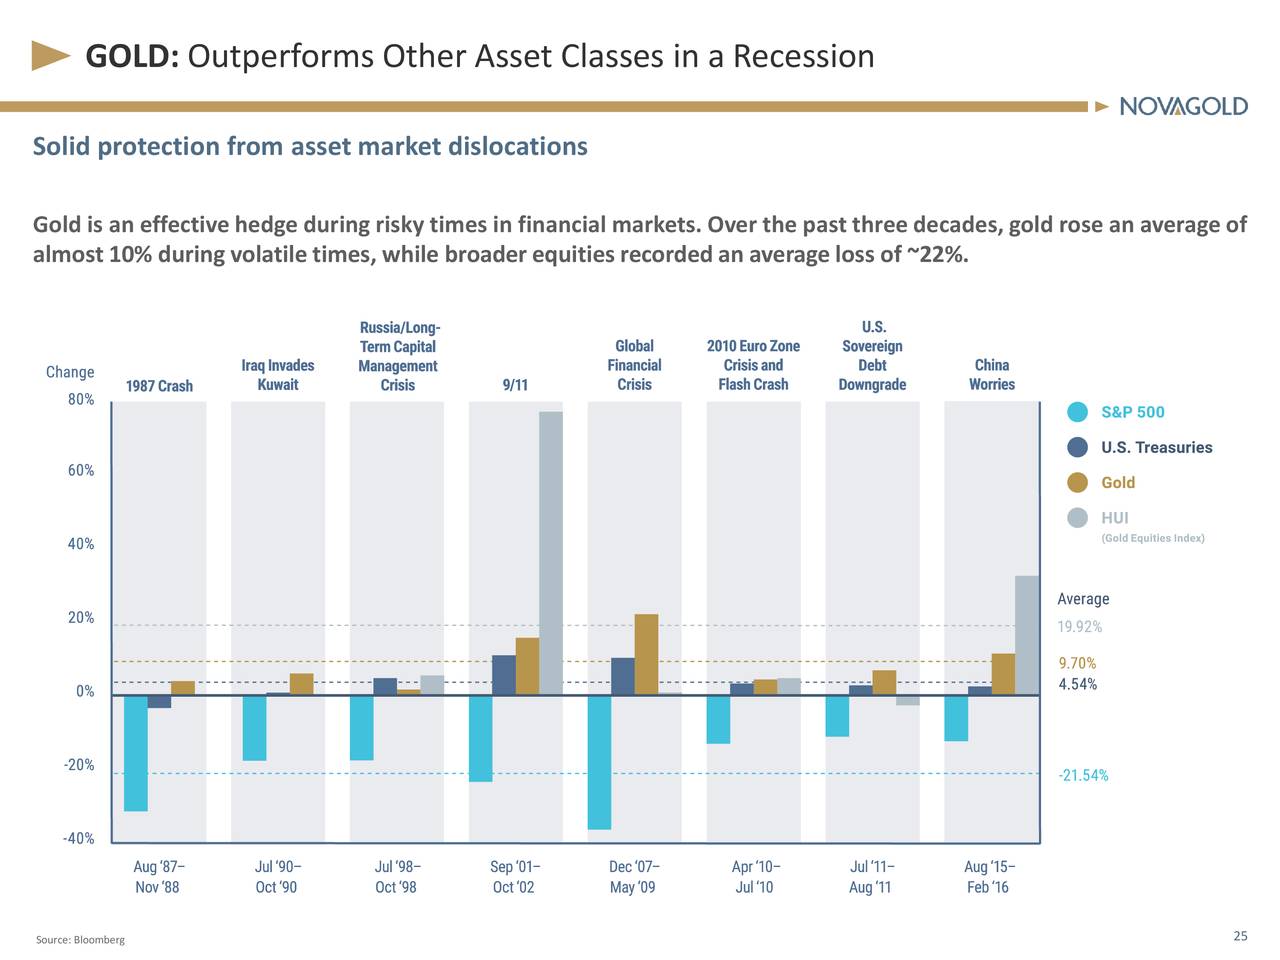 GOLD: Outperforms Other Asset Classes in a Recession